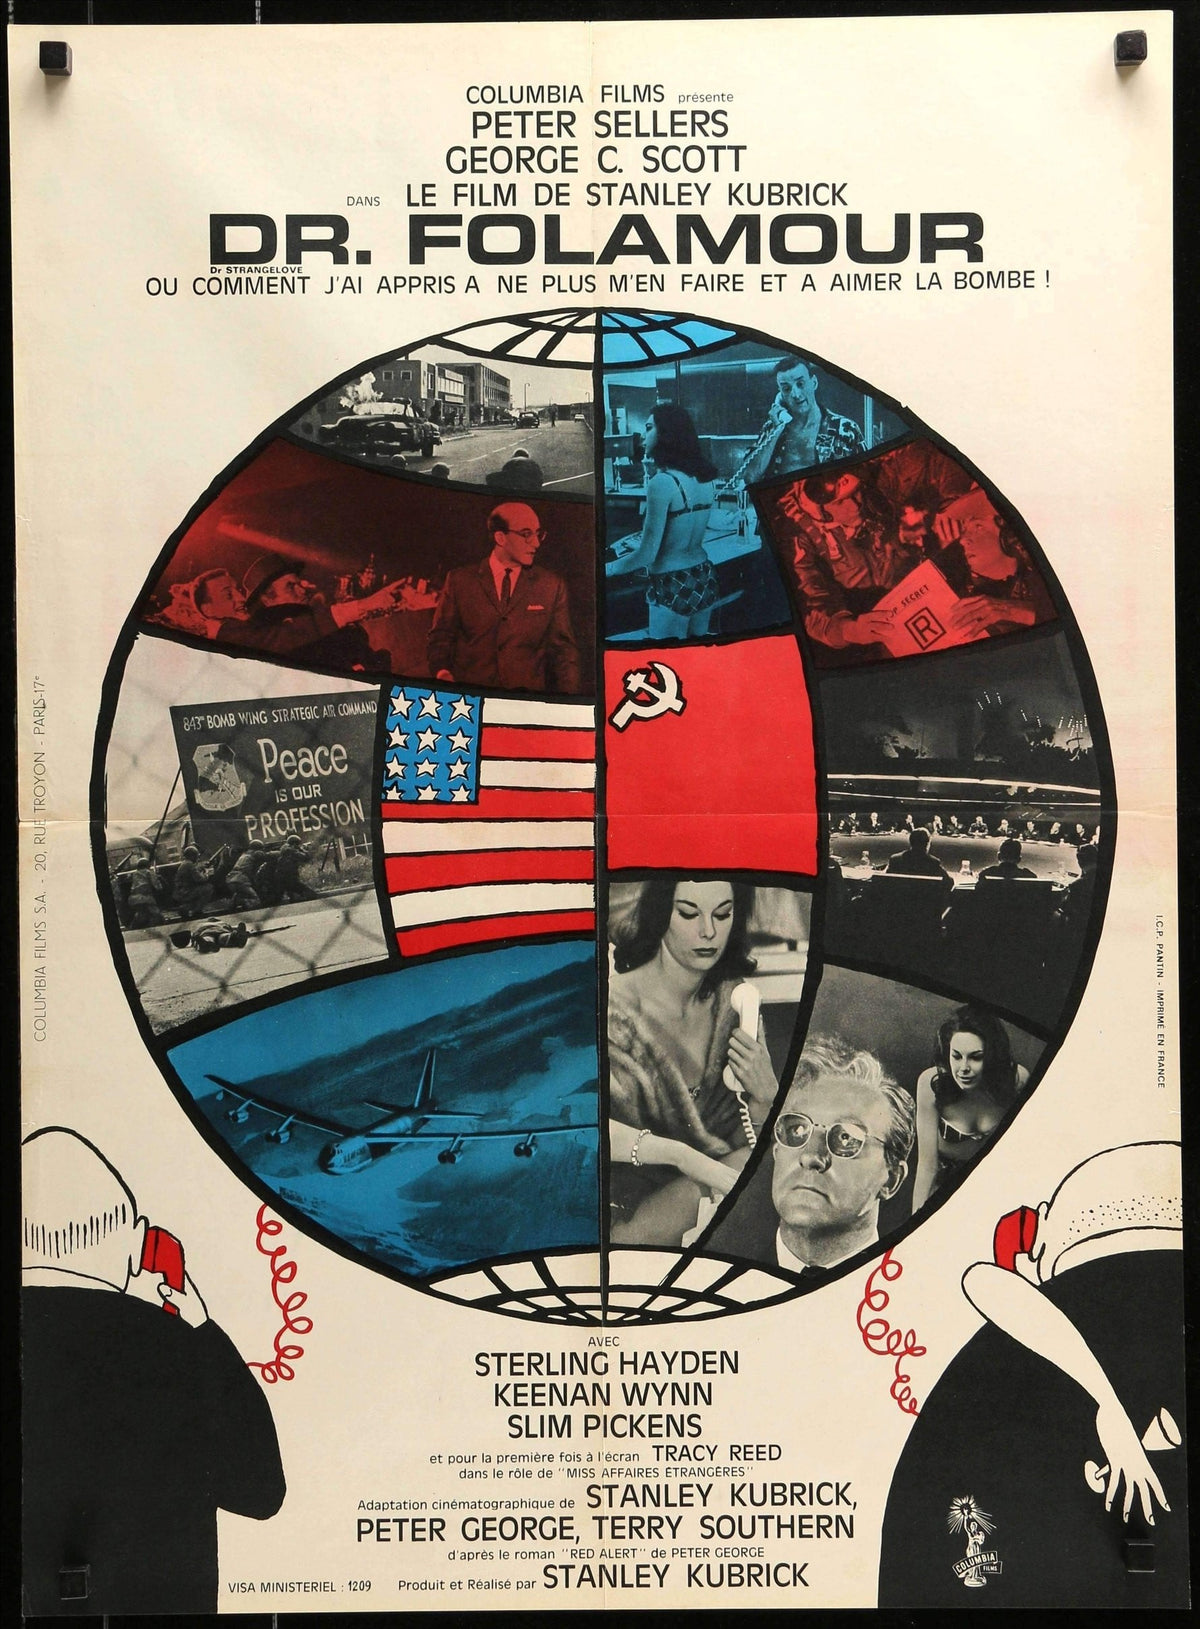 Dr. Strangelove or: How I Learned to Stop Worrying and Love the Bomb (1964) original movie poster for sale at Original Film Art